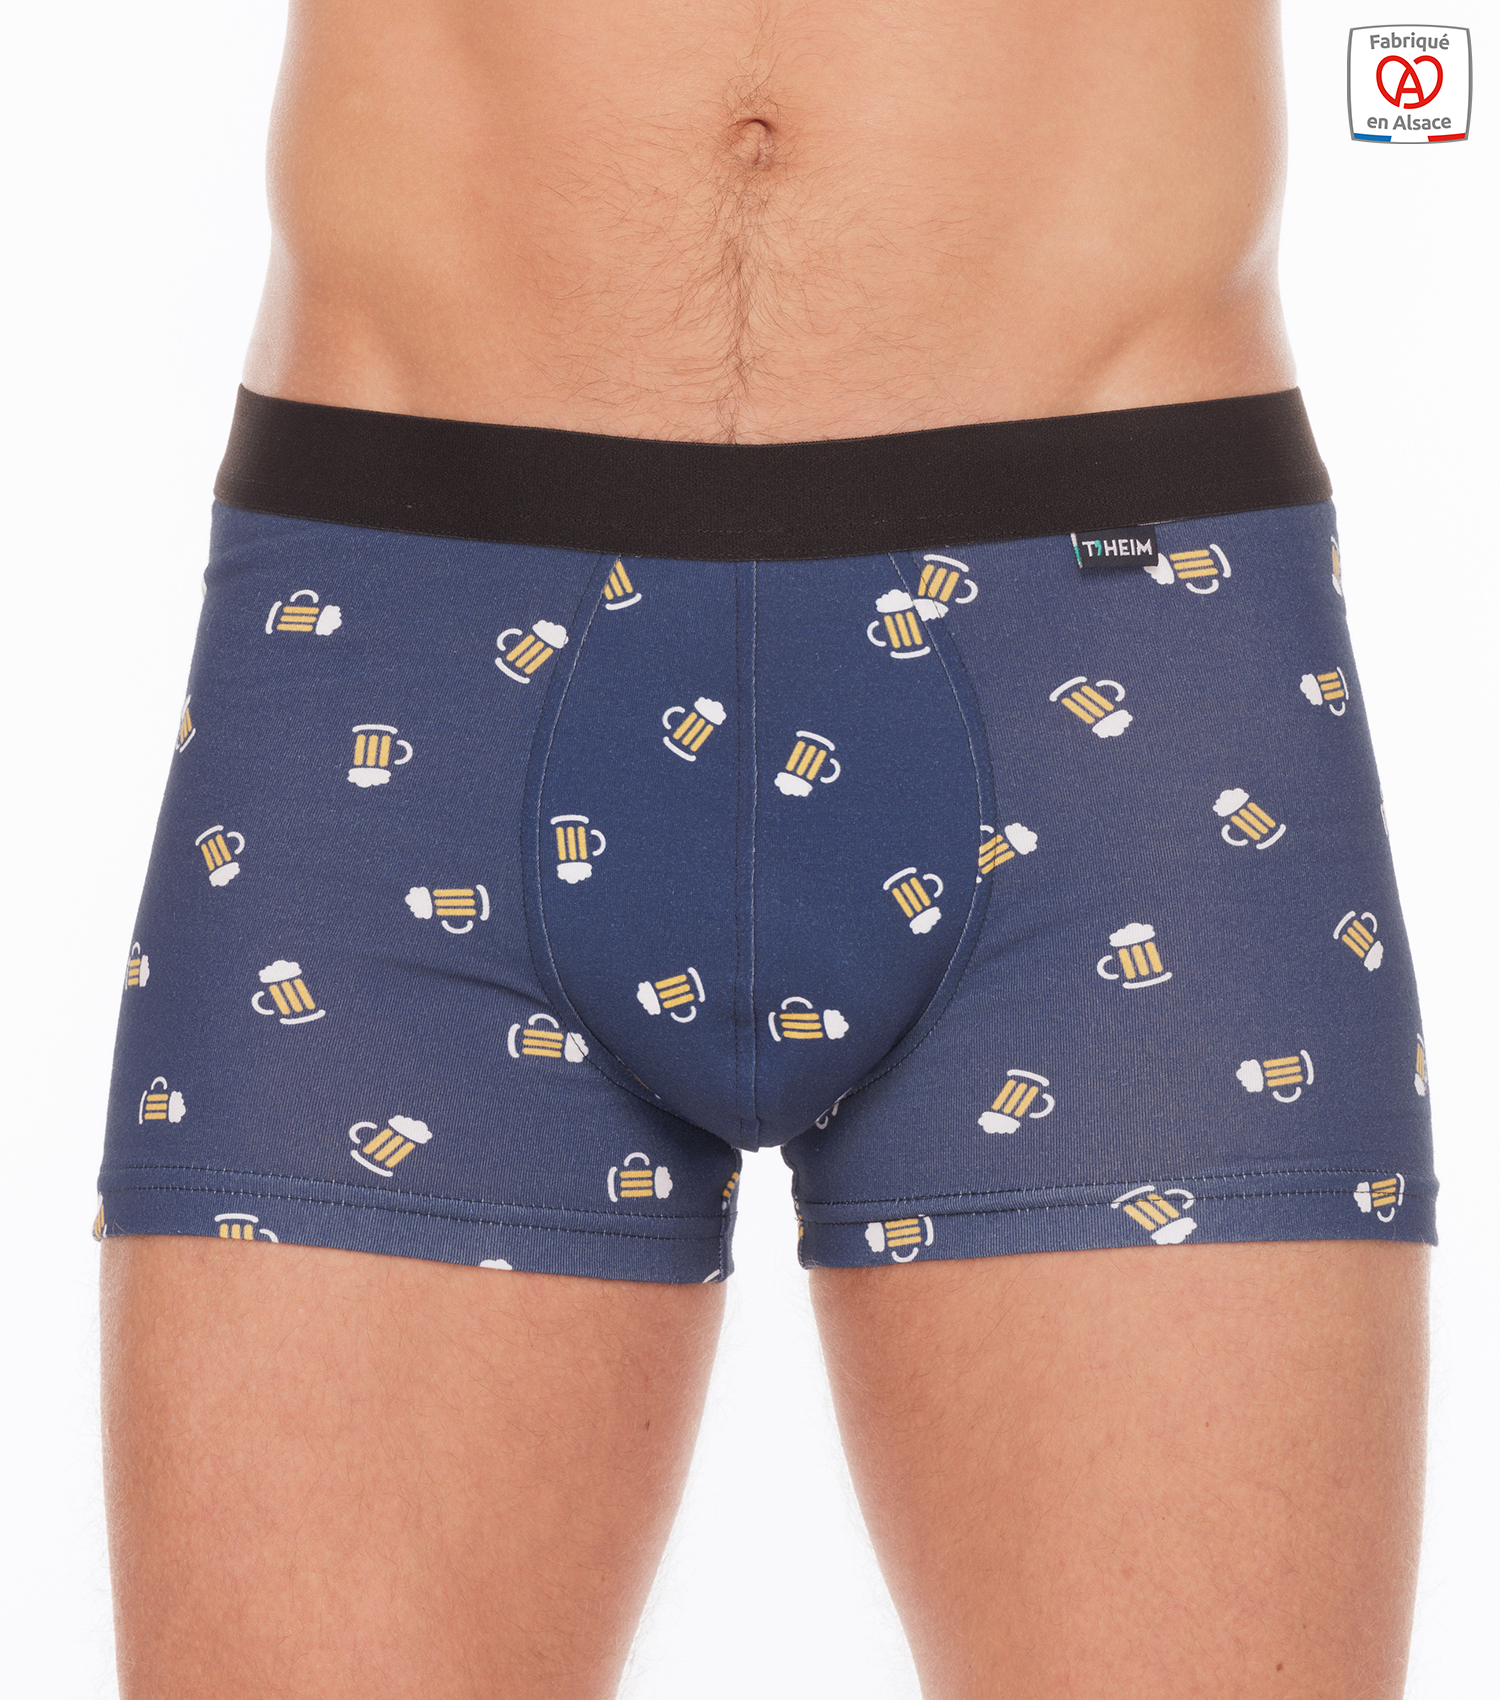 theim-boxer-coton-made-in-france-motifs-biere-1500-x-1700-px